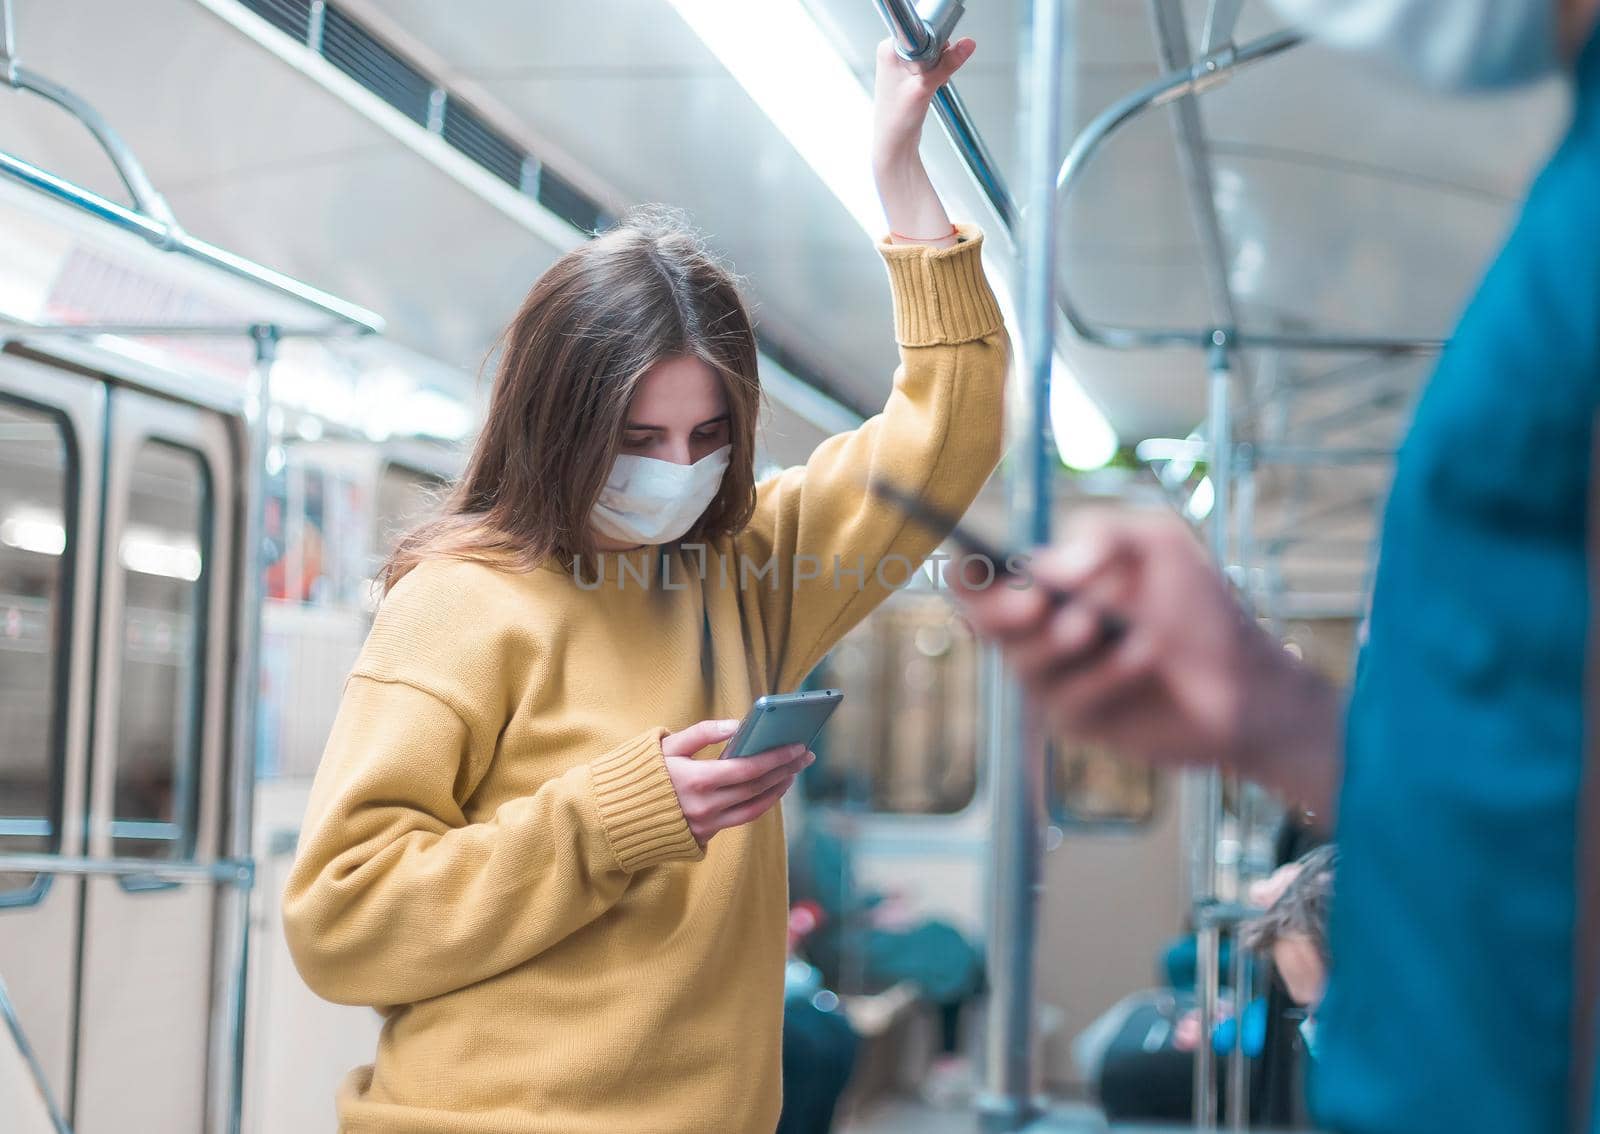 people with smartphones standing in a subway car. by SmartPhotoLab